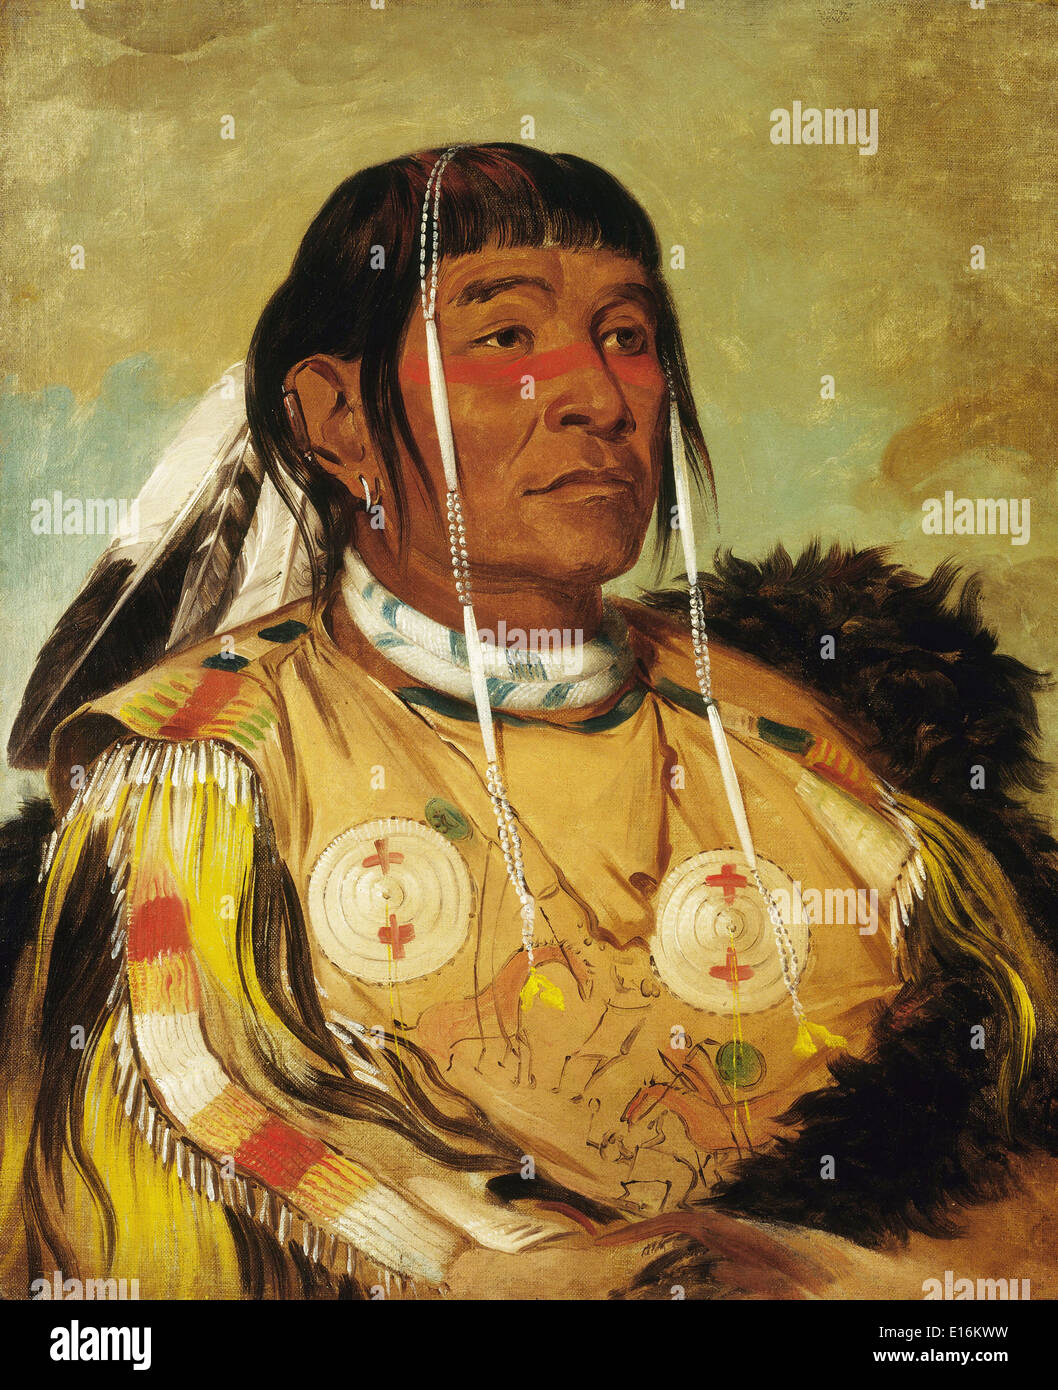 Sha-có-pay The Six Chief of the Plains Ojibwa by George Catlin, 1832 Stock Photo